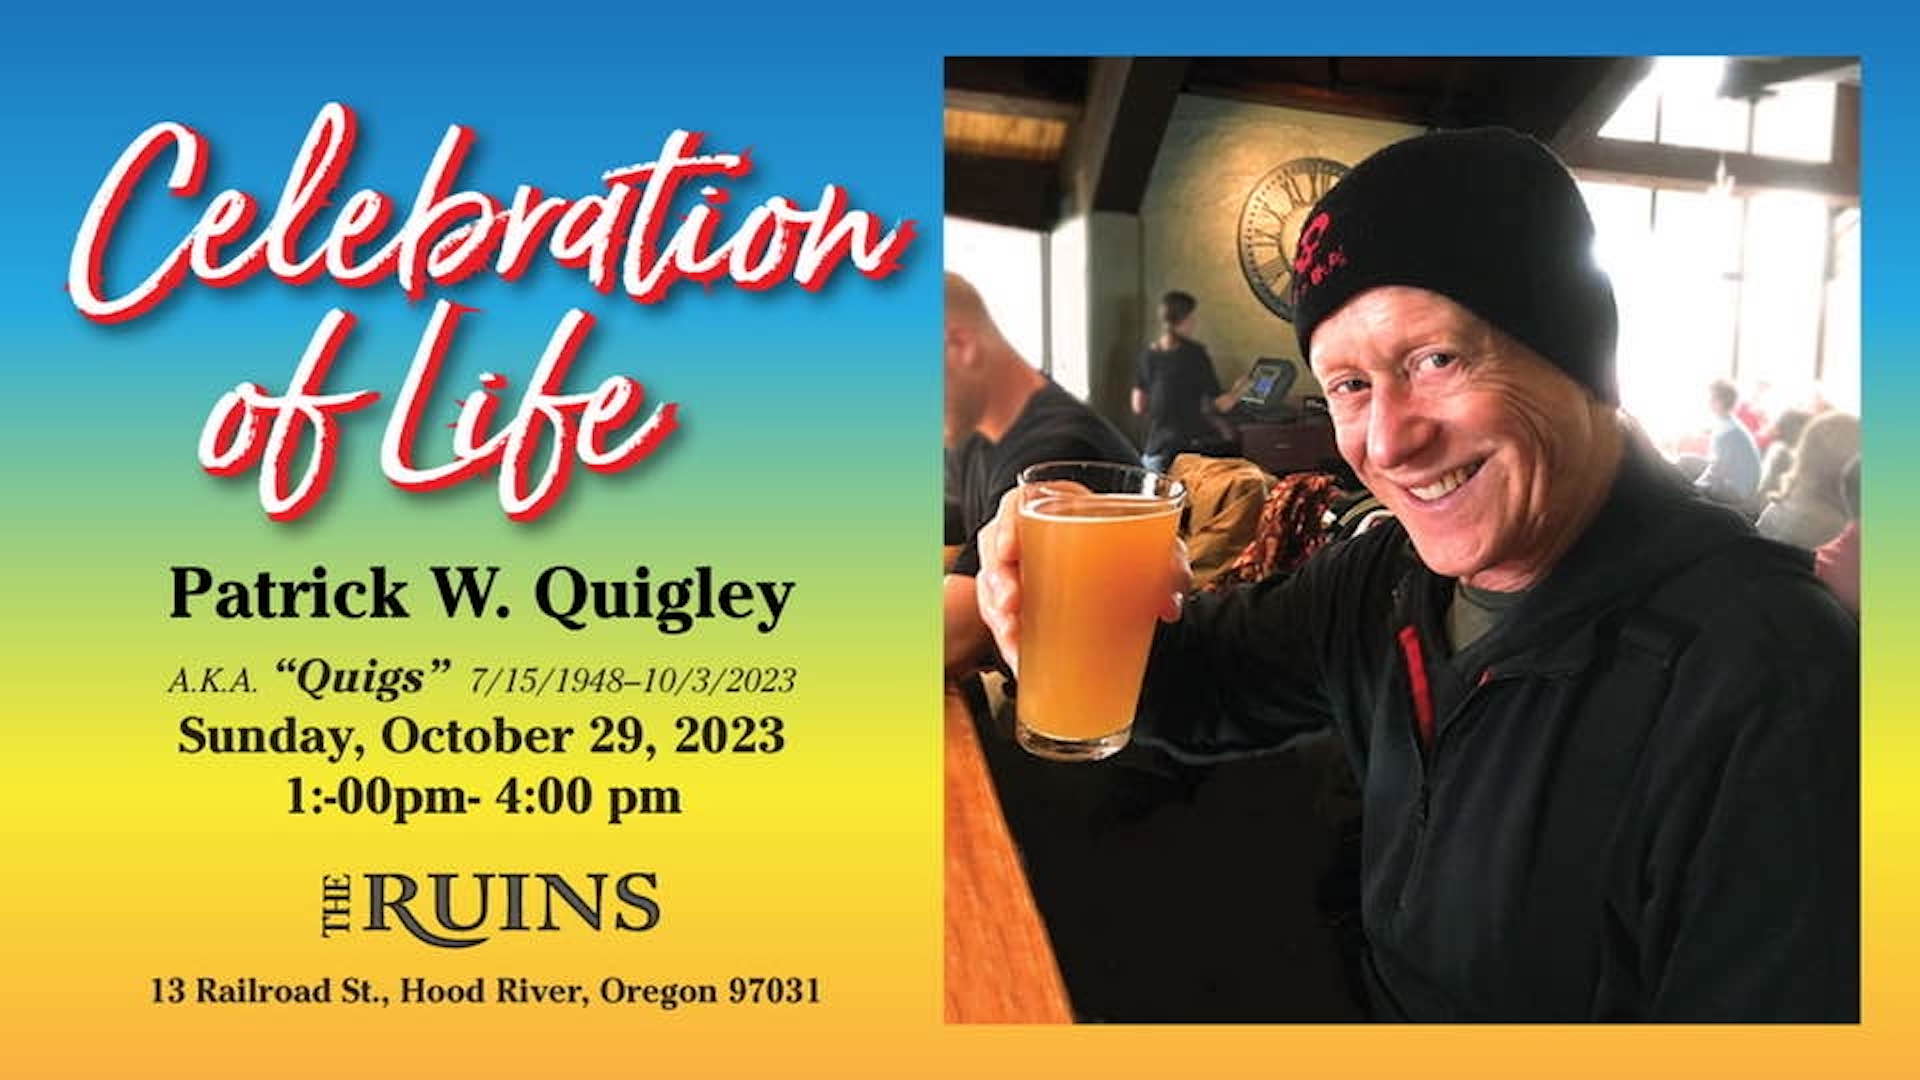 Patrick Quigley Celebration of Life October 29, 2023 at The Ruins in Hood River